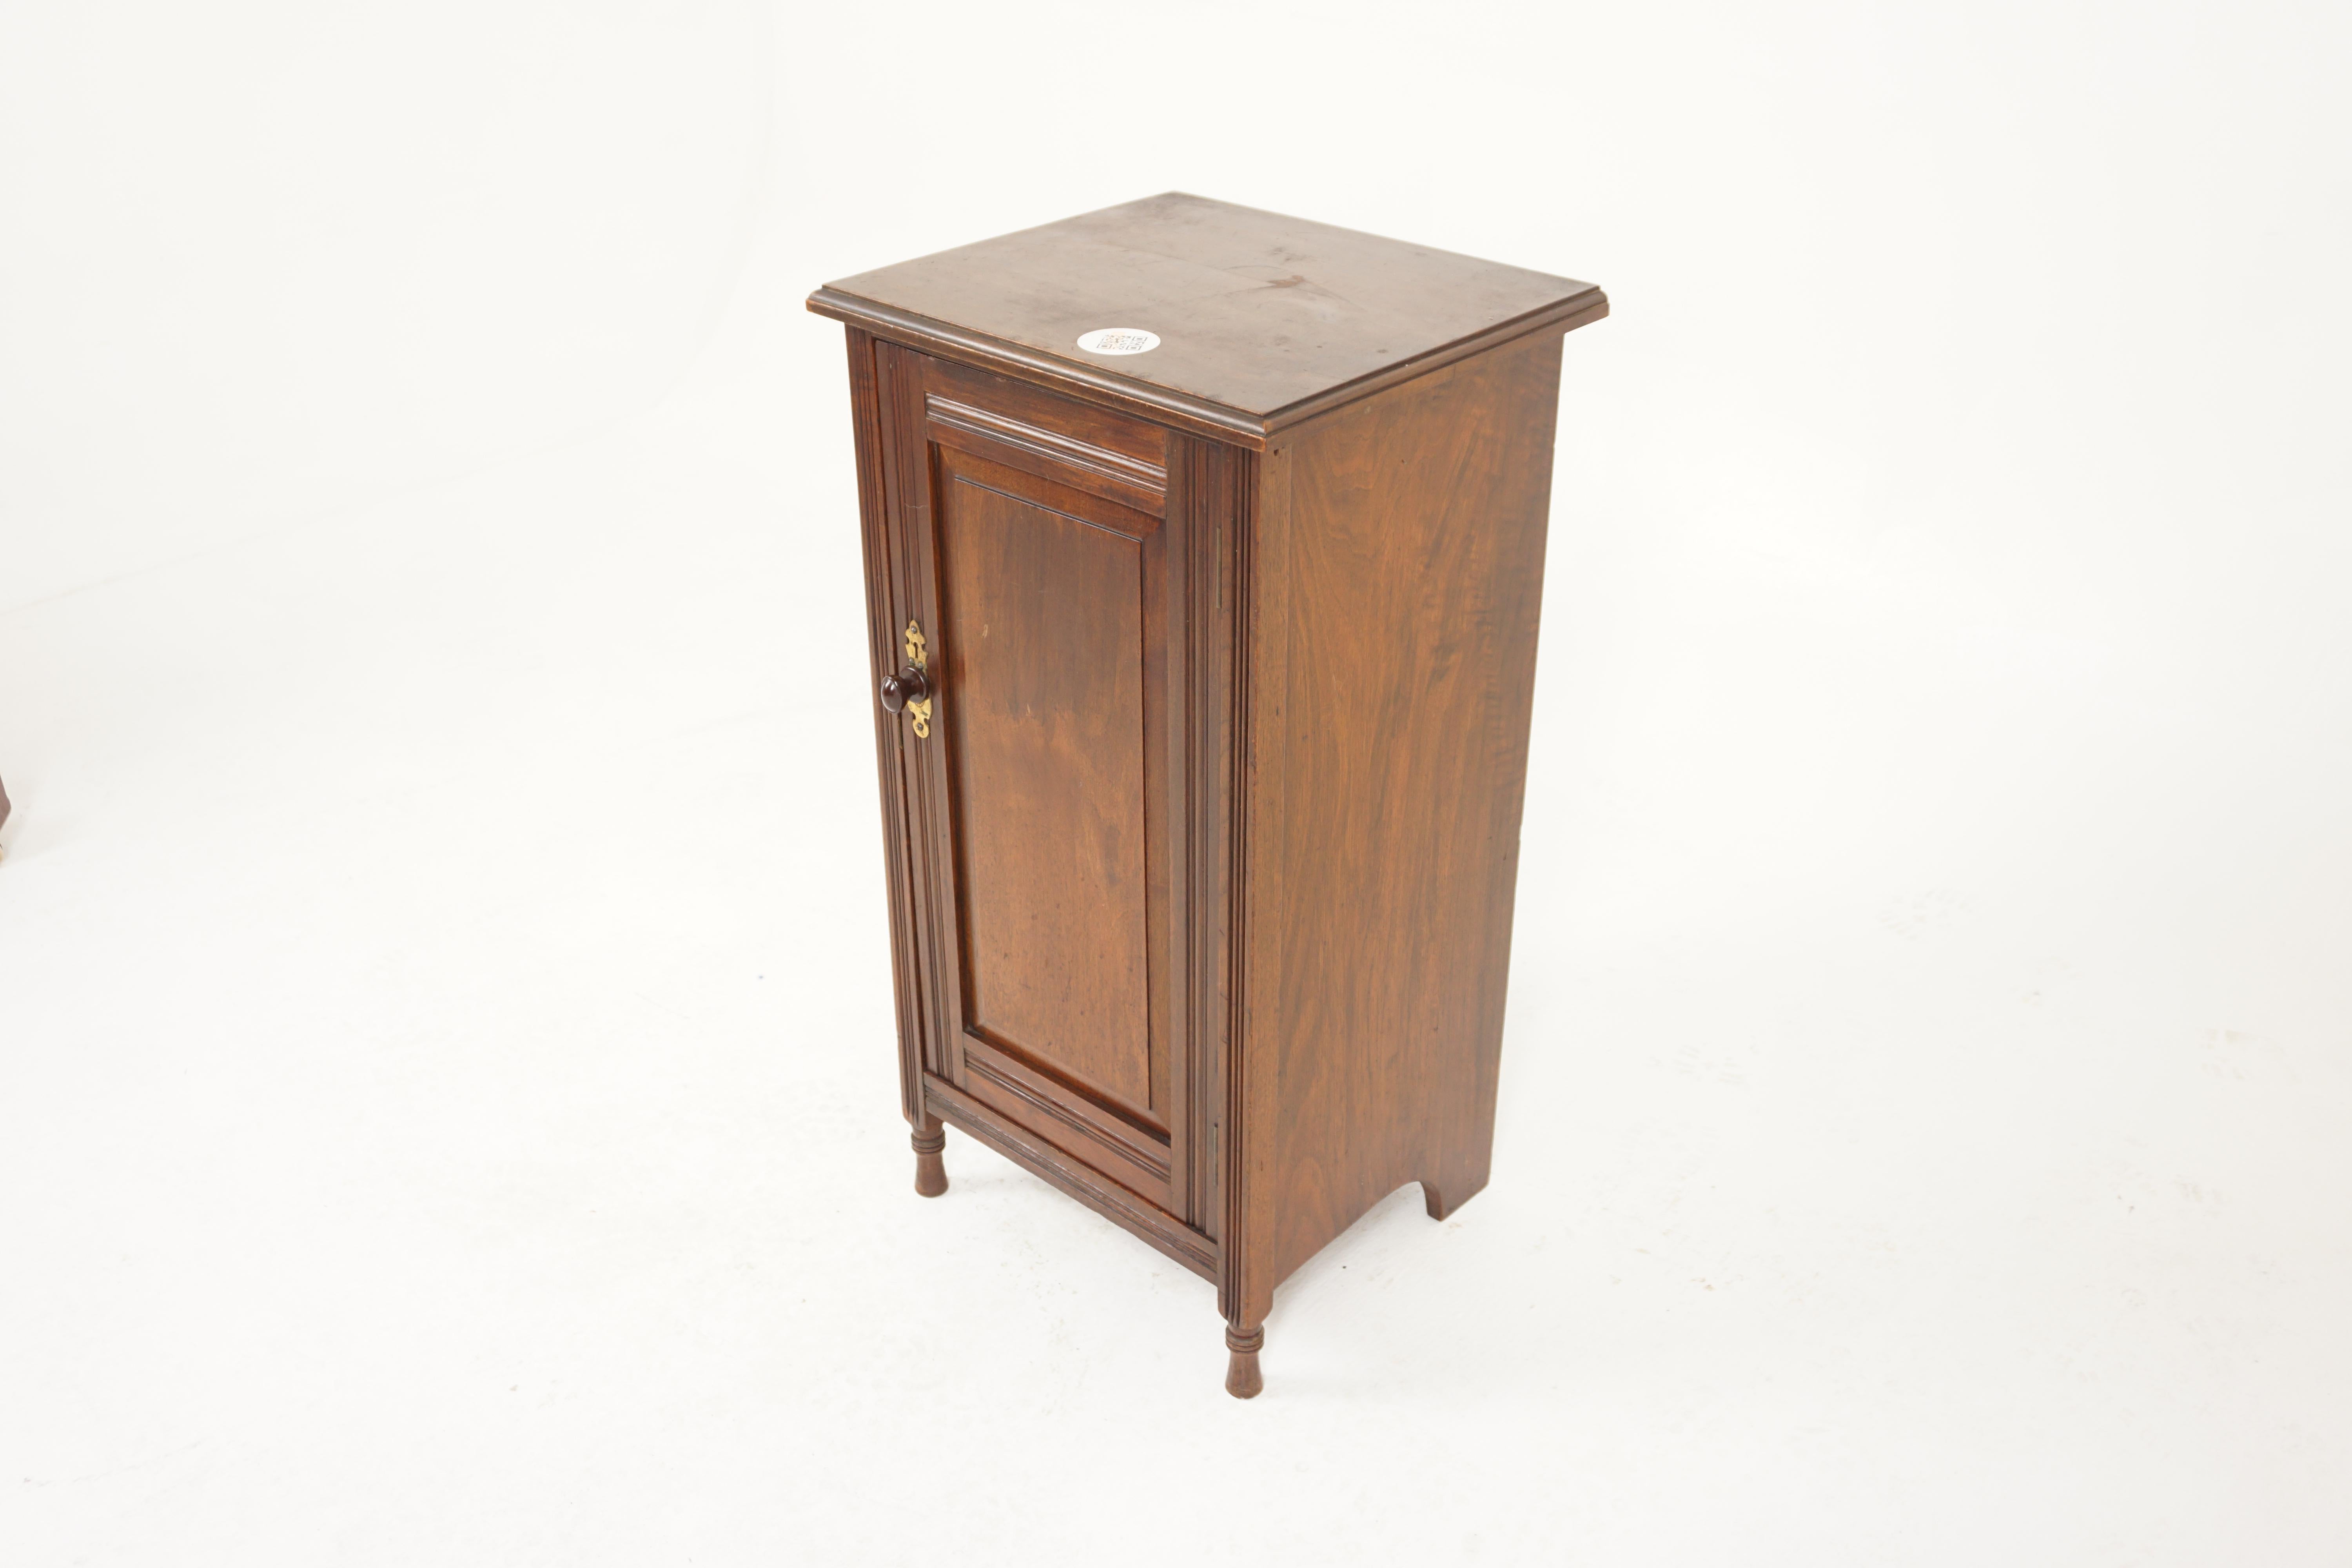 Victorian walnut nightstand beside cabinet, lamp table, Scotland 1880, H187

Scotland 1890
Solid walnut
Original finish

Rectangular moulded top, single panelled door
Opens to reveal single shelf
With handle
Ending on short turned feet
Please note